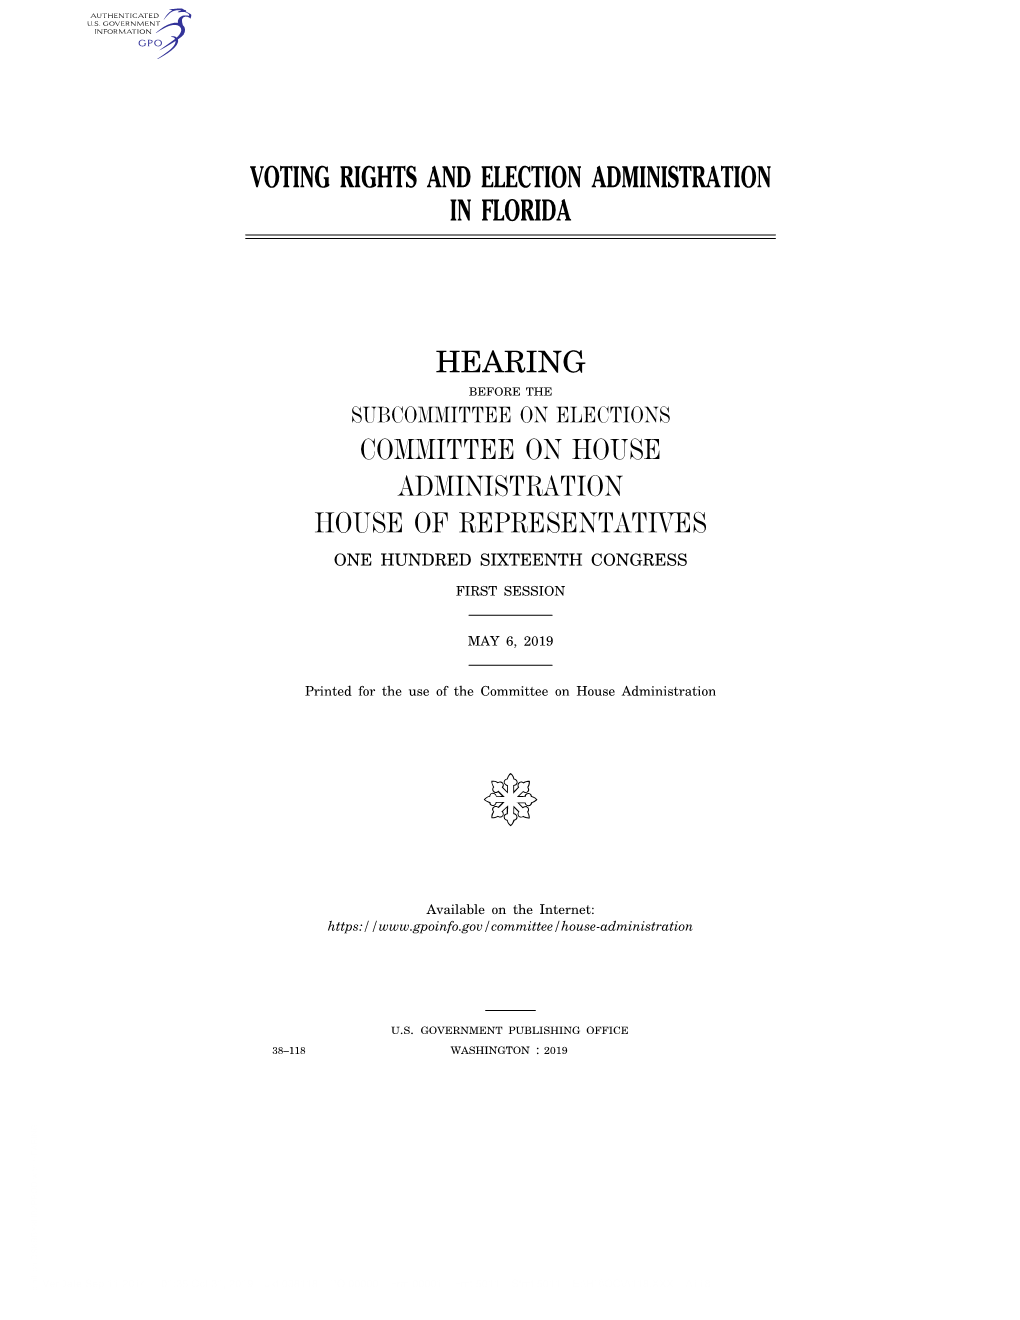 Voting Rights and Election Administration in Florida